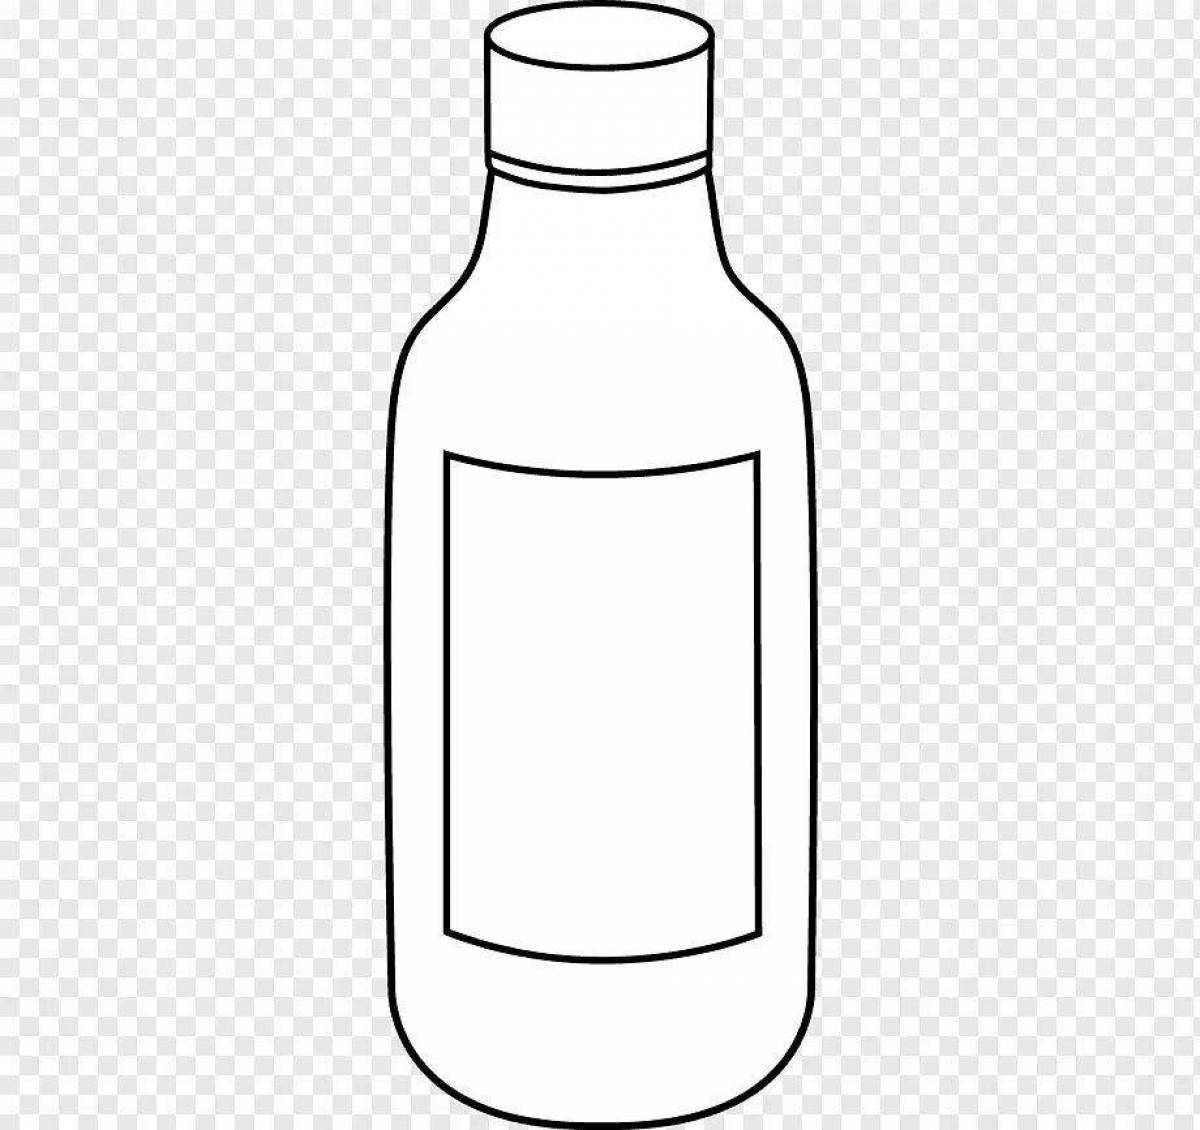 Living bottle coloring page